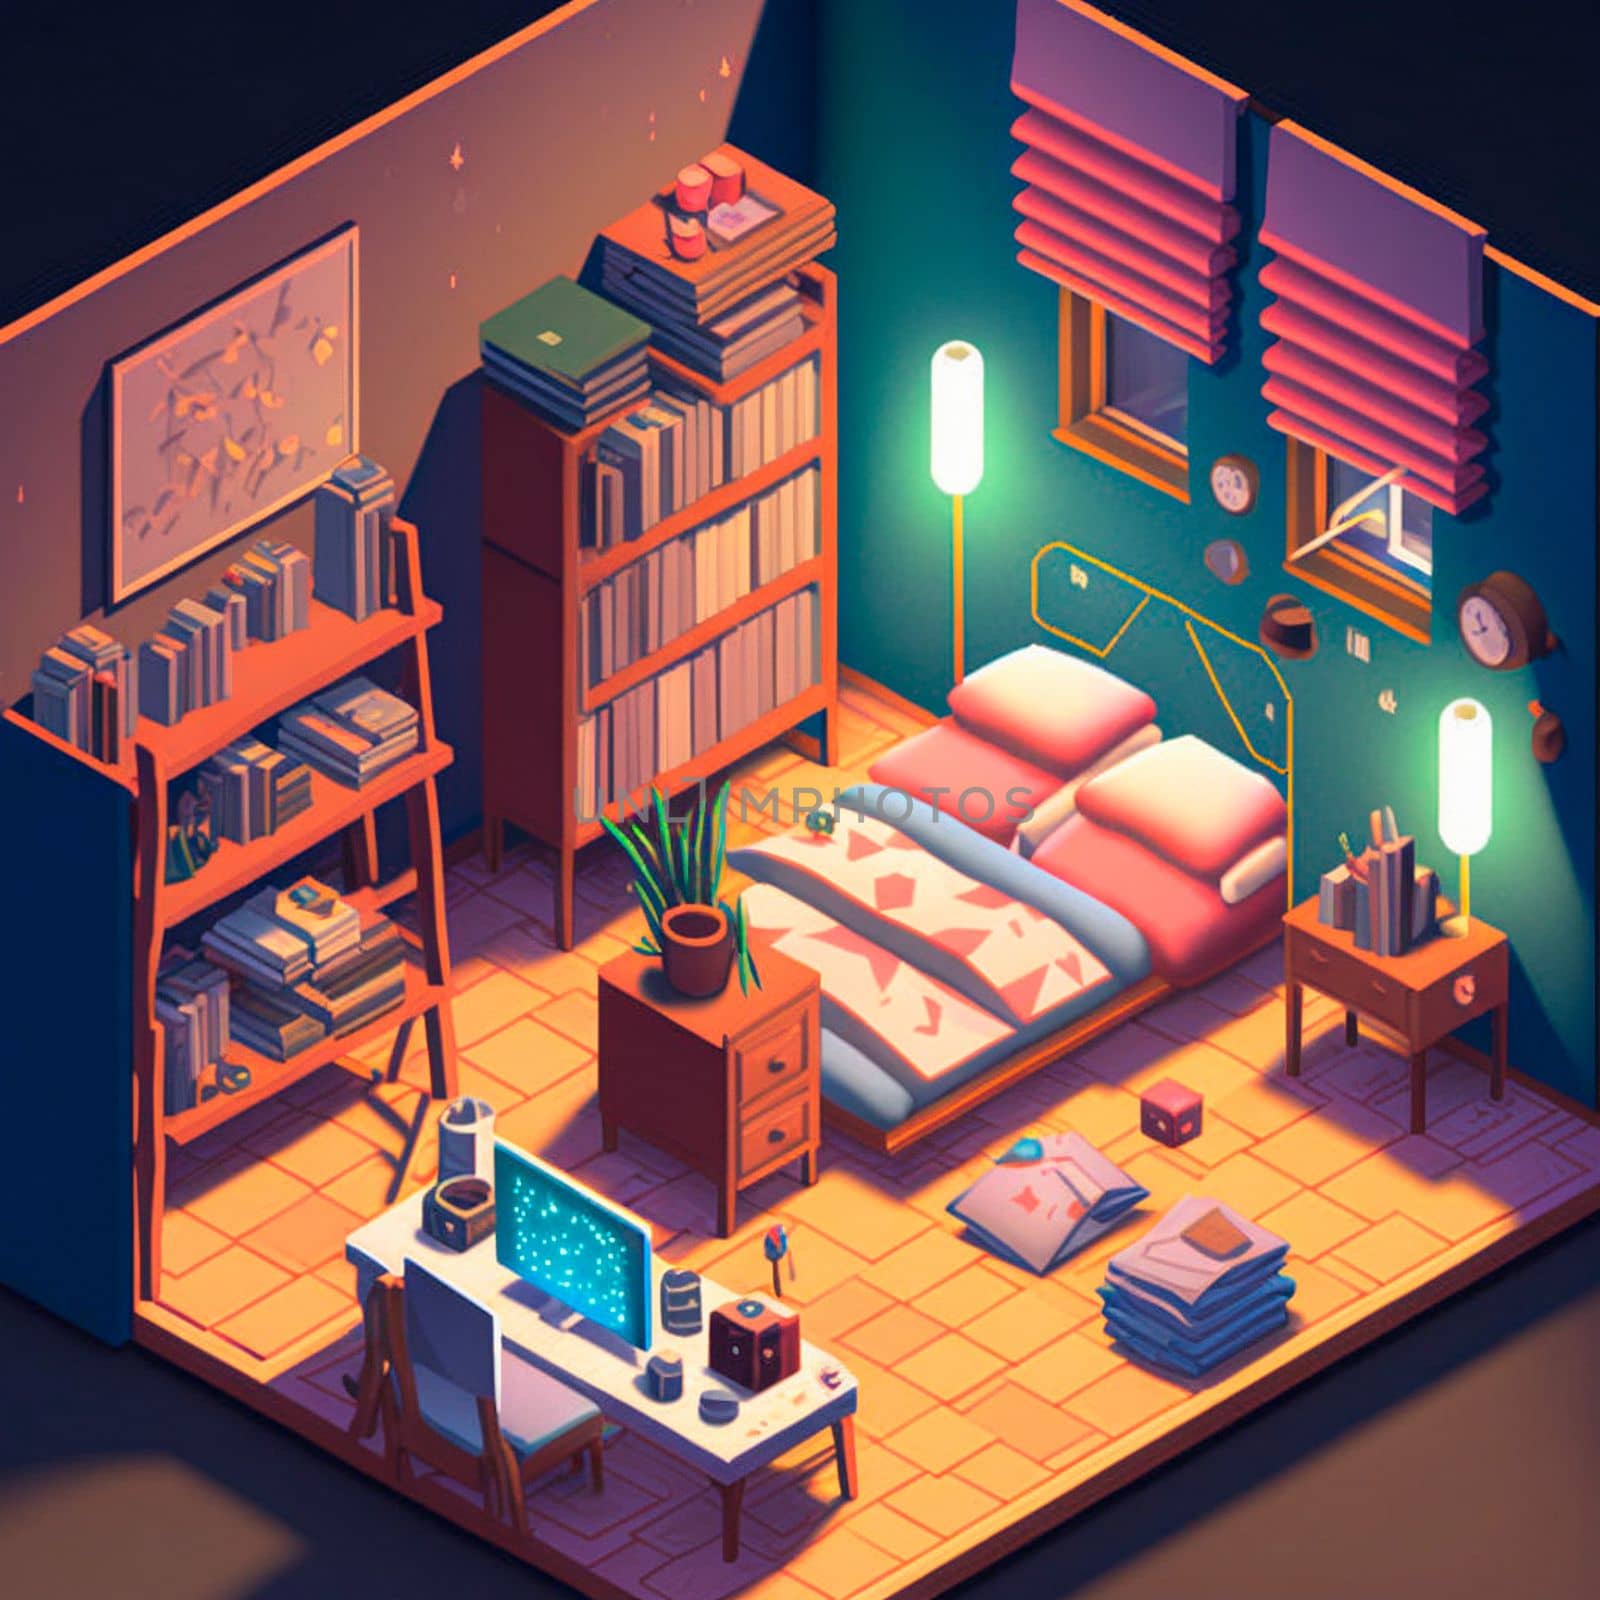 isometric image of the bedroom. High quality illustration